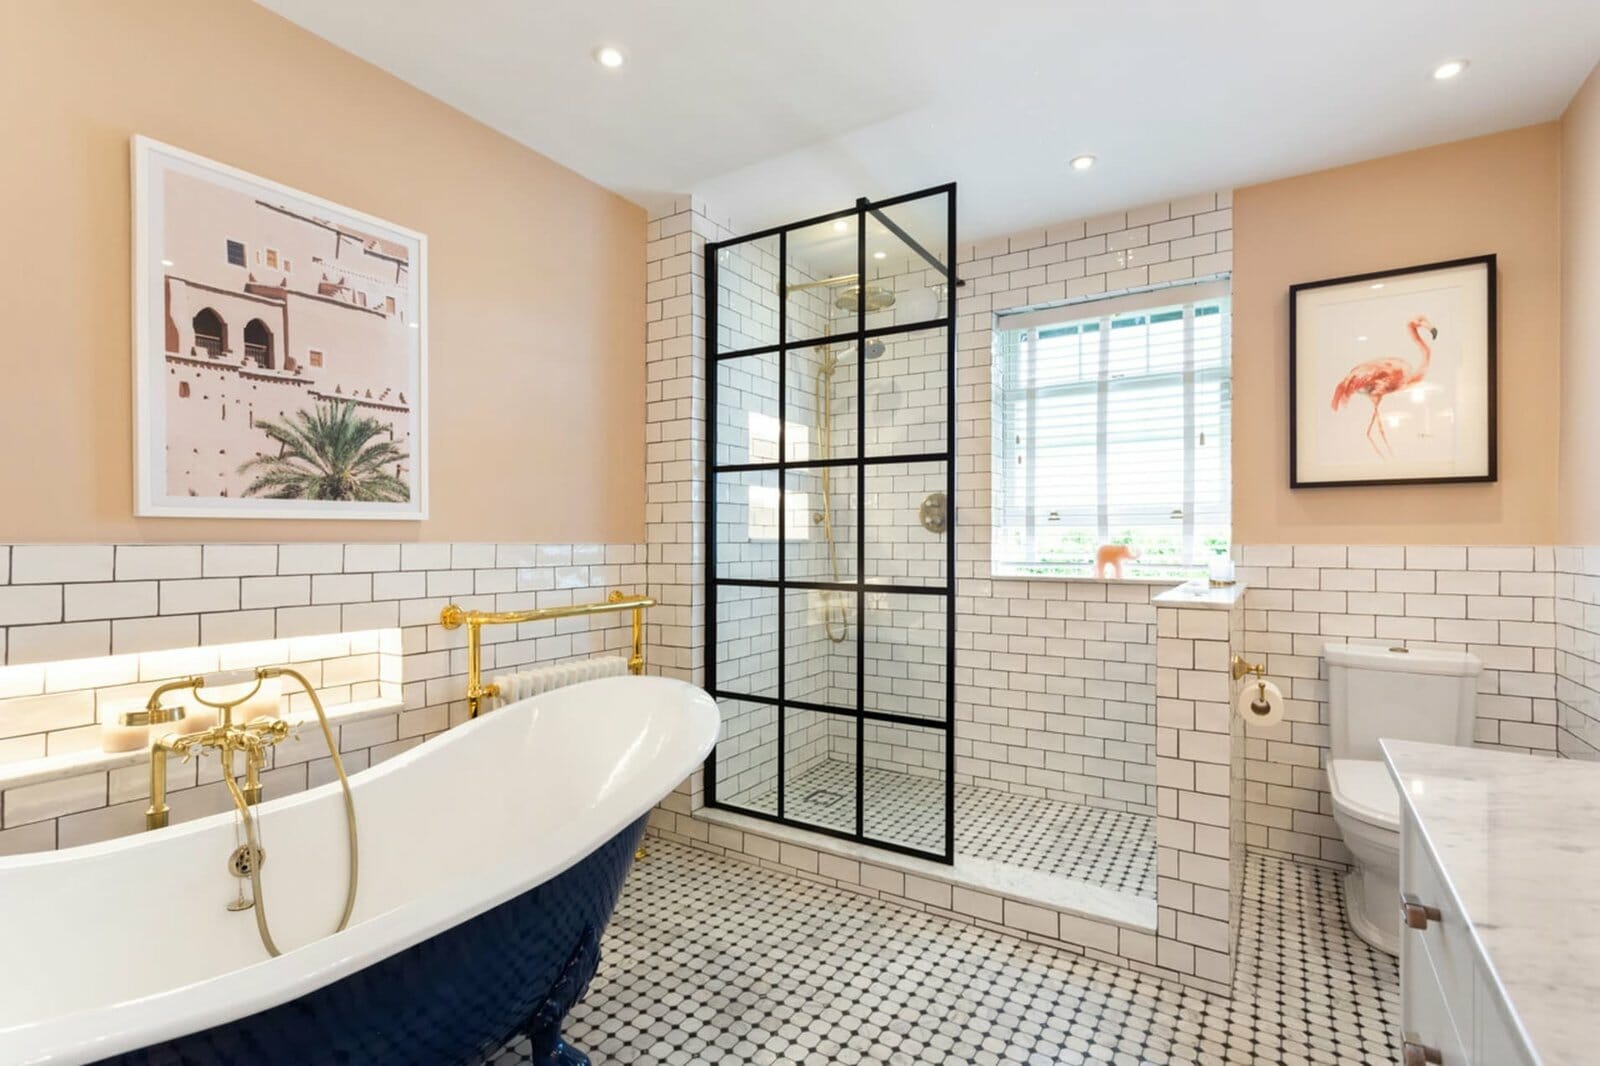 5 Bathroom tiles tips to accentuate the interior of your bathroom